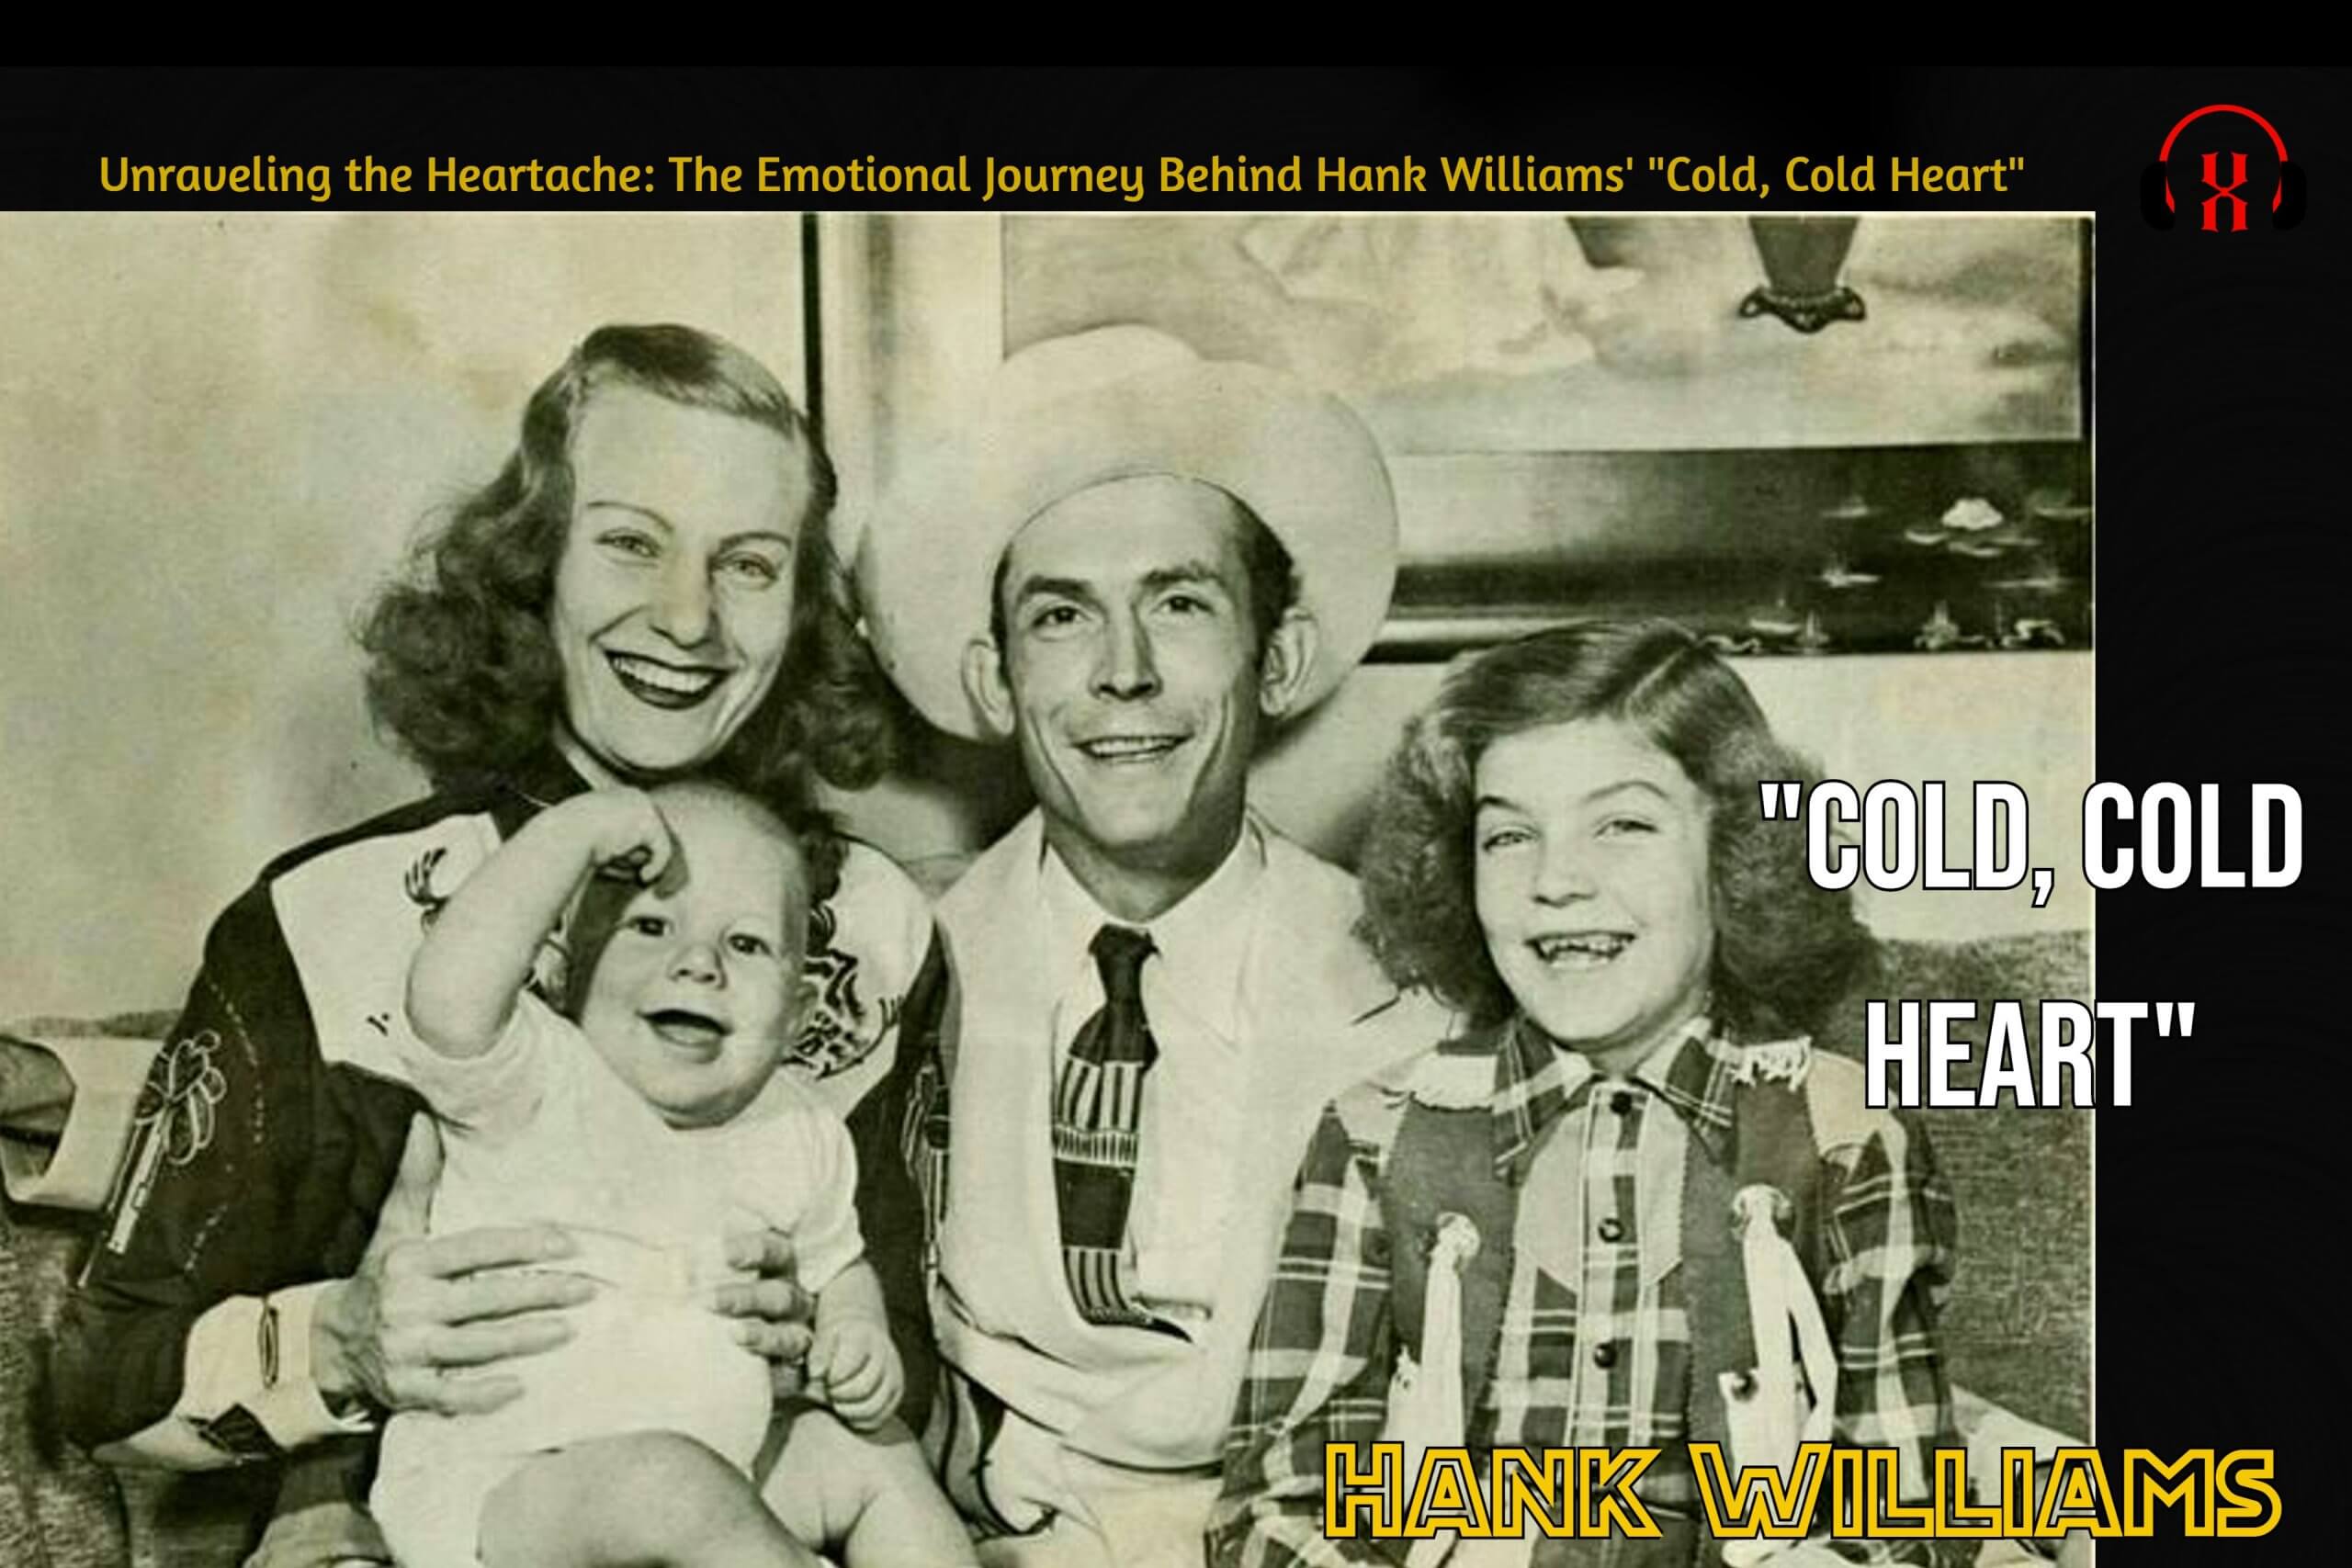 Unraveling the Heartache: The Emotional Journey Behind Hank Williams’ “Cold, Cold Heart”